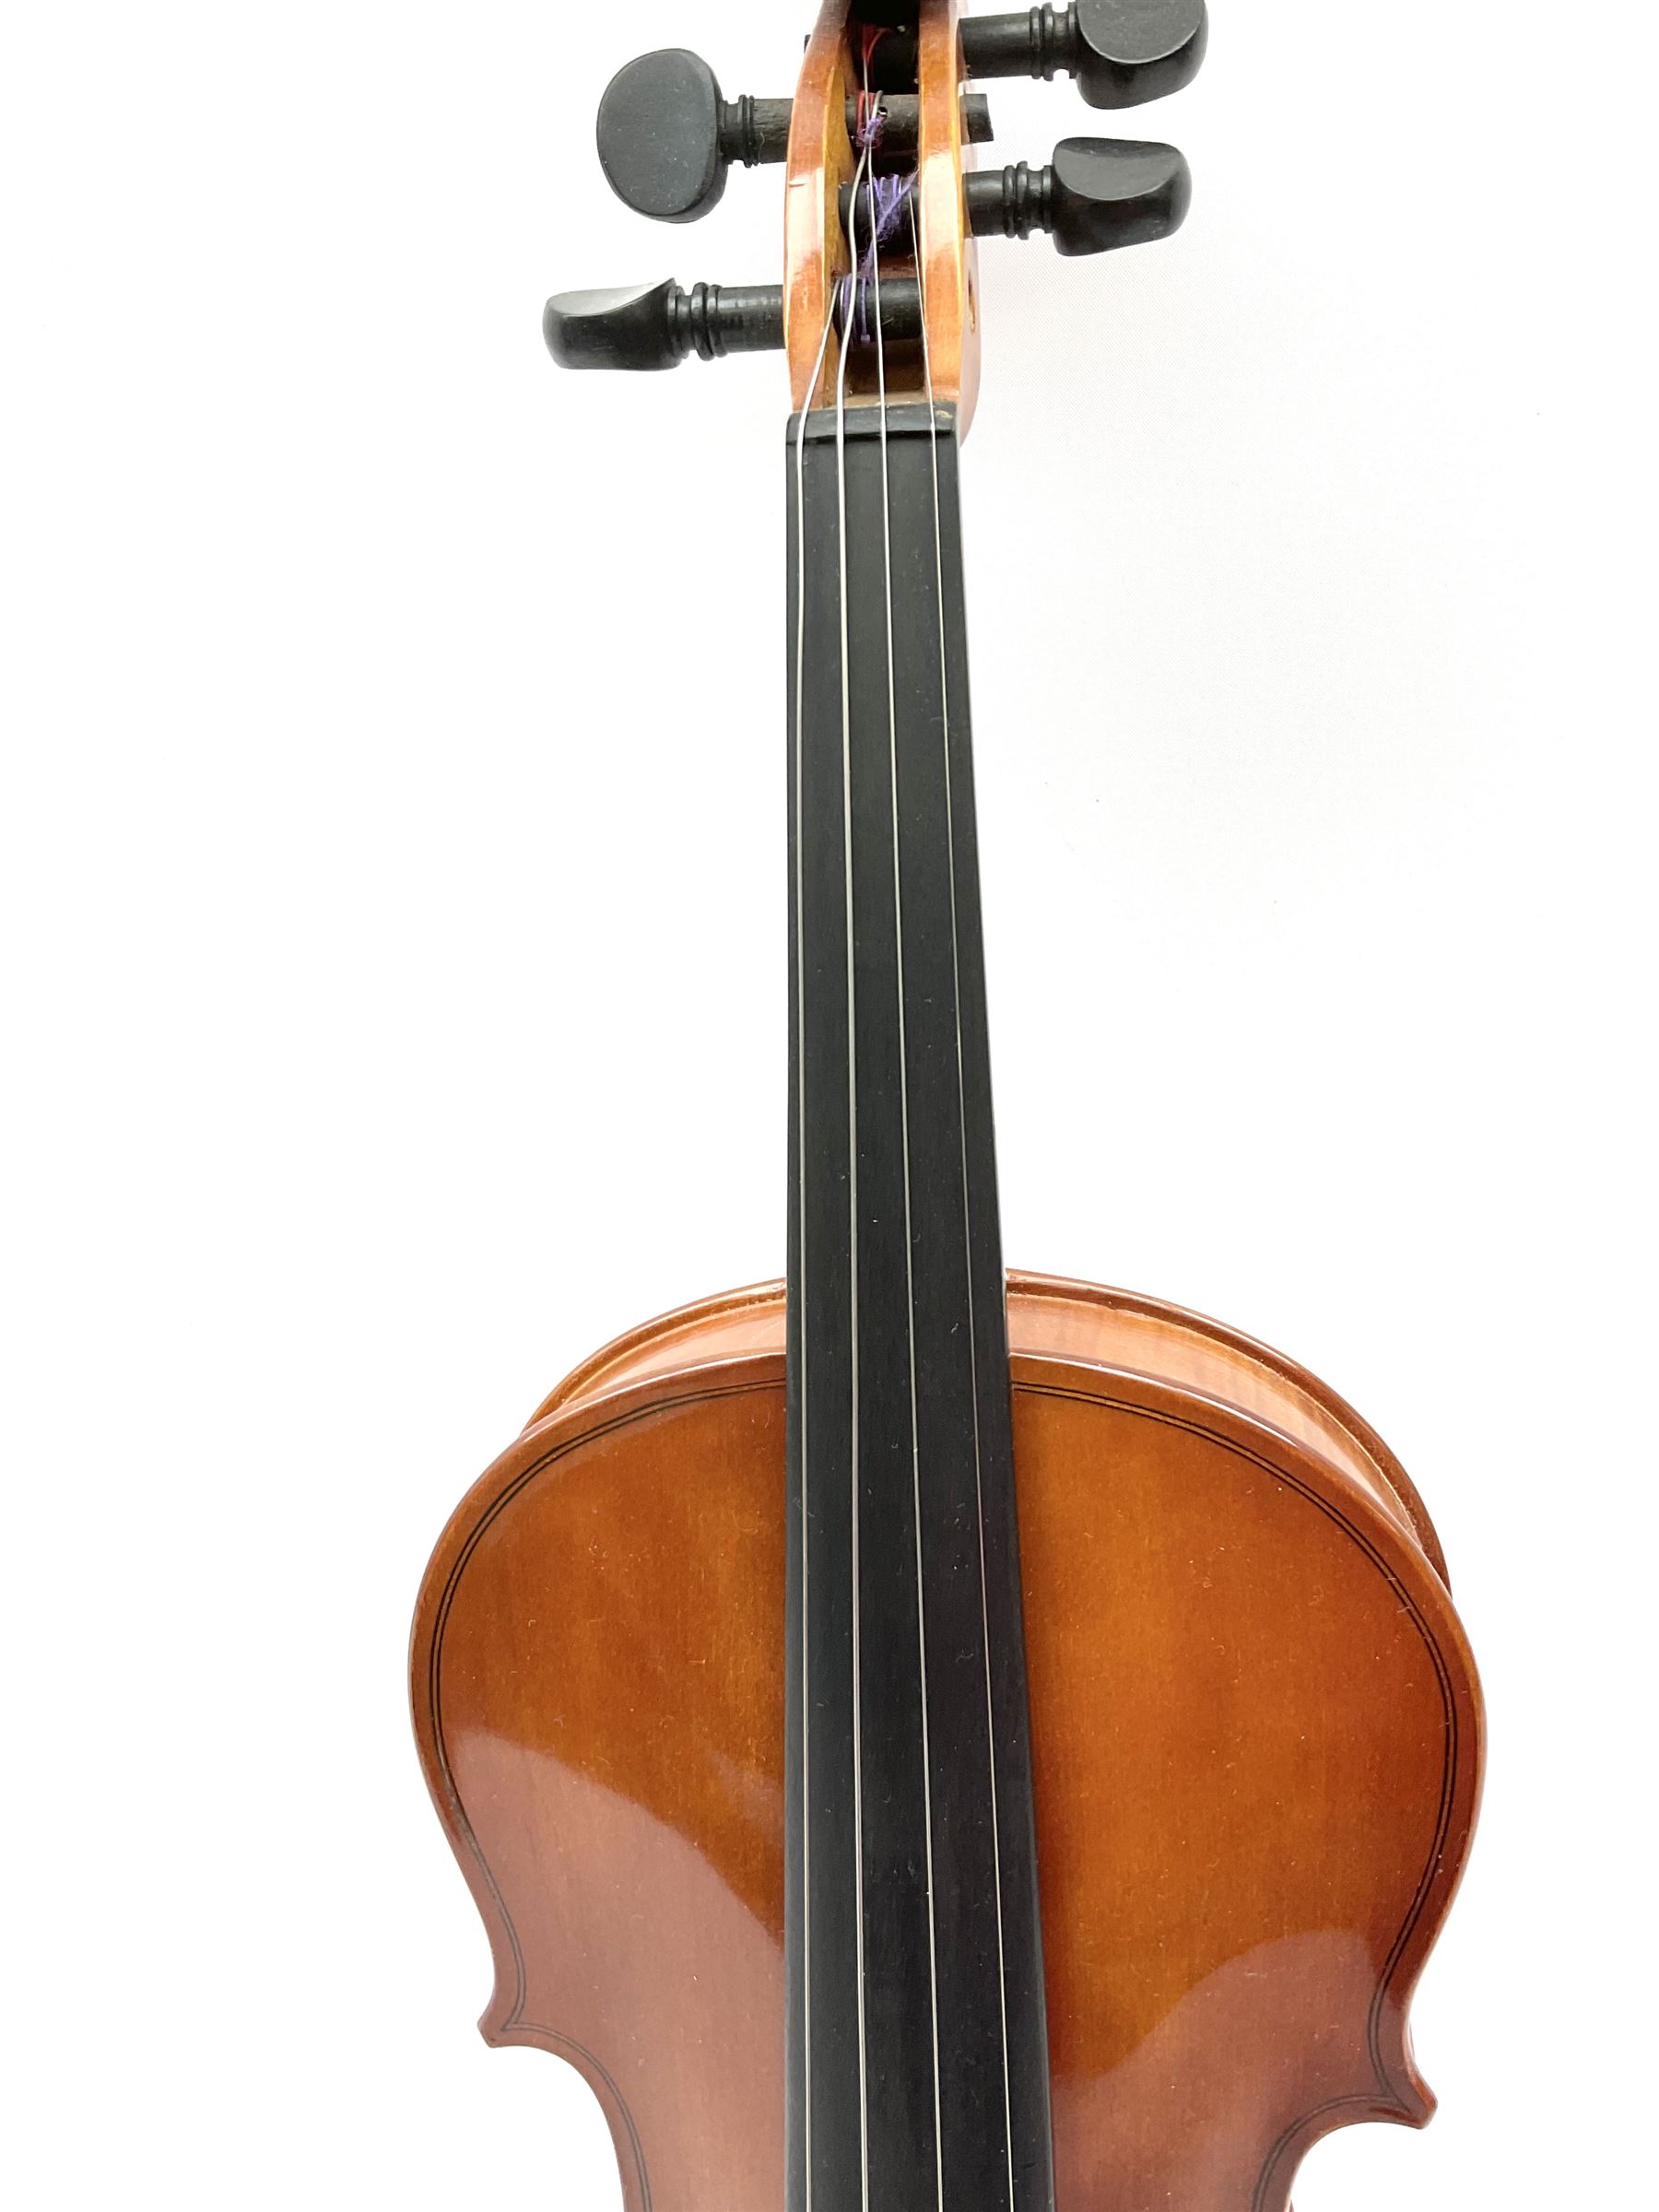 Modern violin with 36cm two-piece maple back and ribs and spruce top 60cm overall - Image 3 of 16